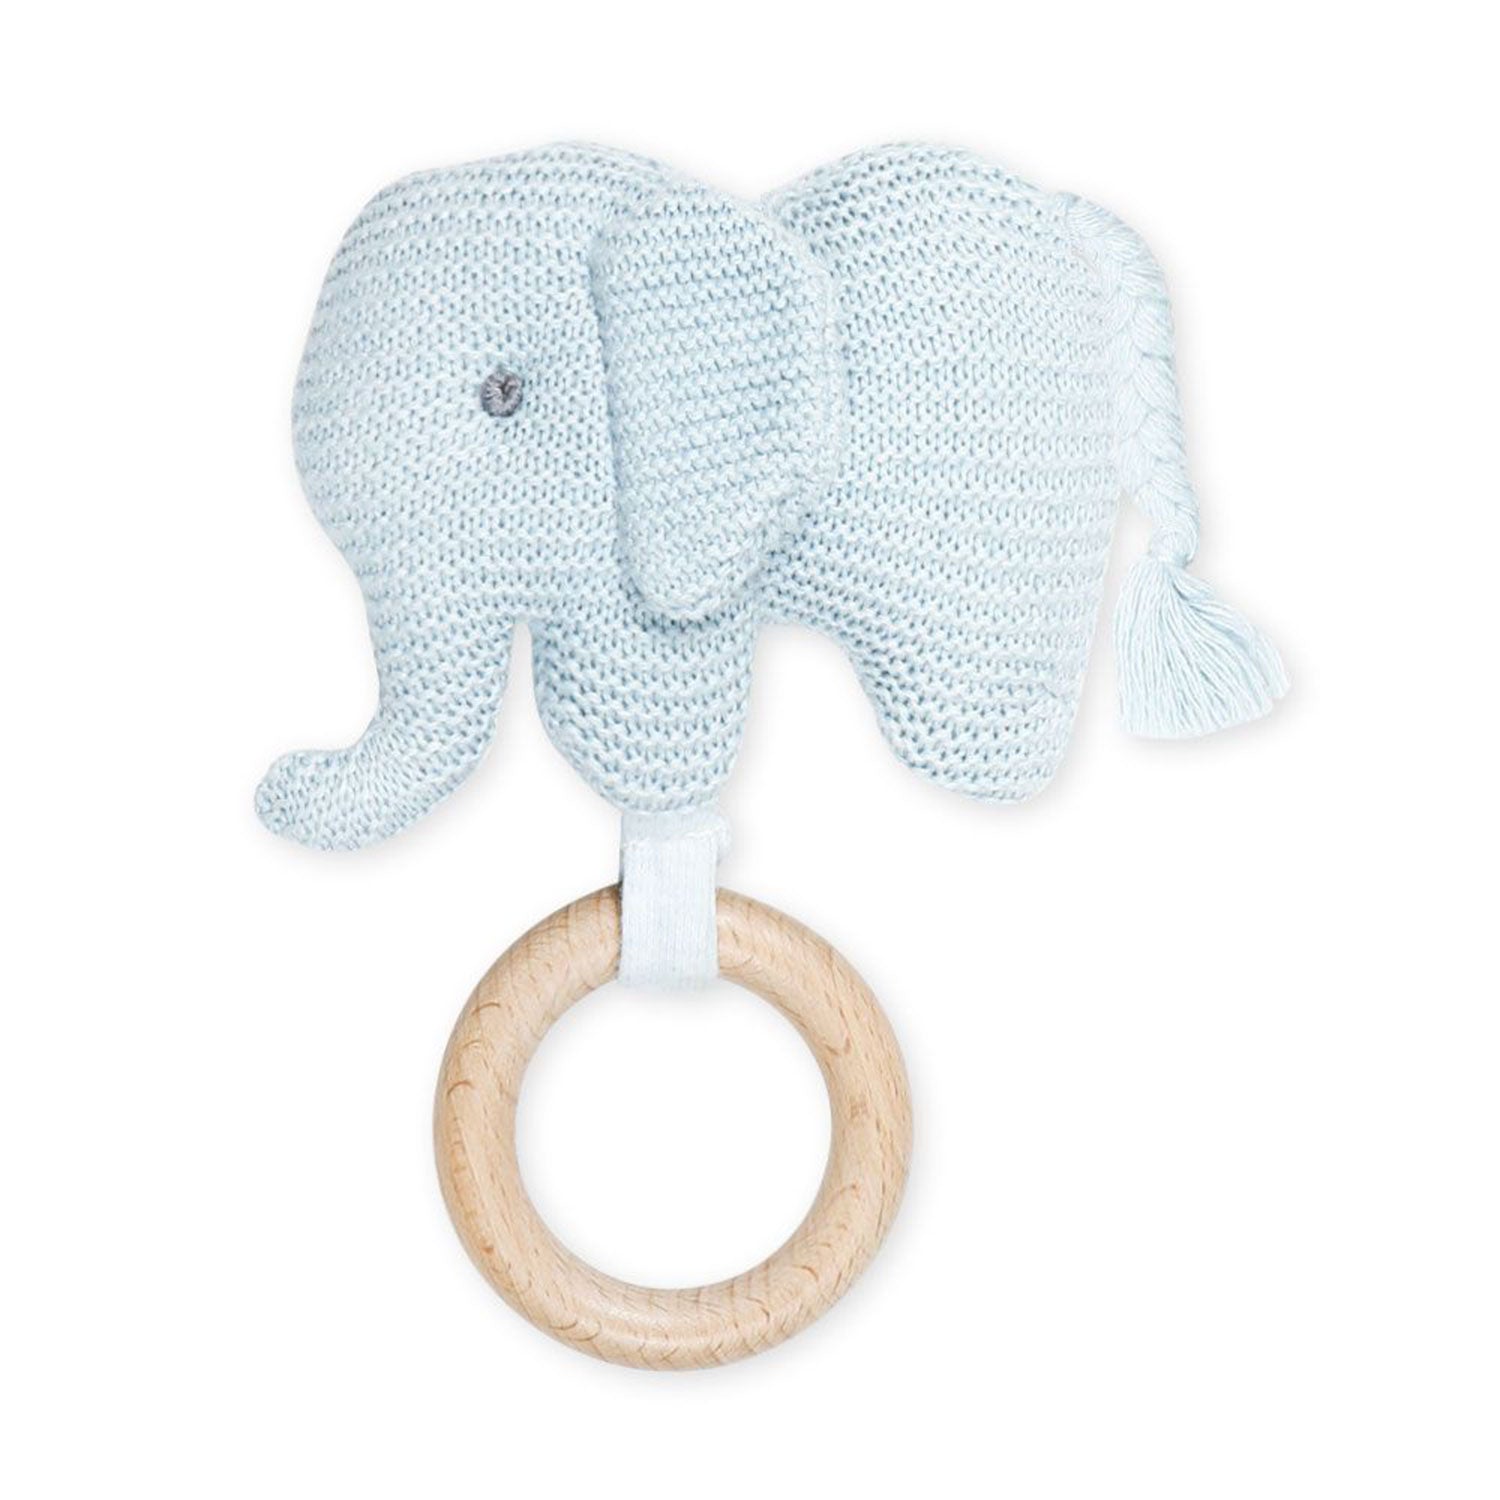 Baby Moo Elephant Wooden Teething Ring Soft Knitted Handheld Rattle - Blue